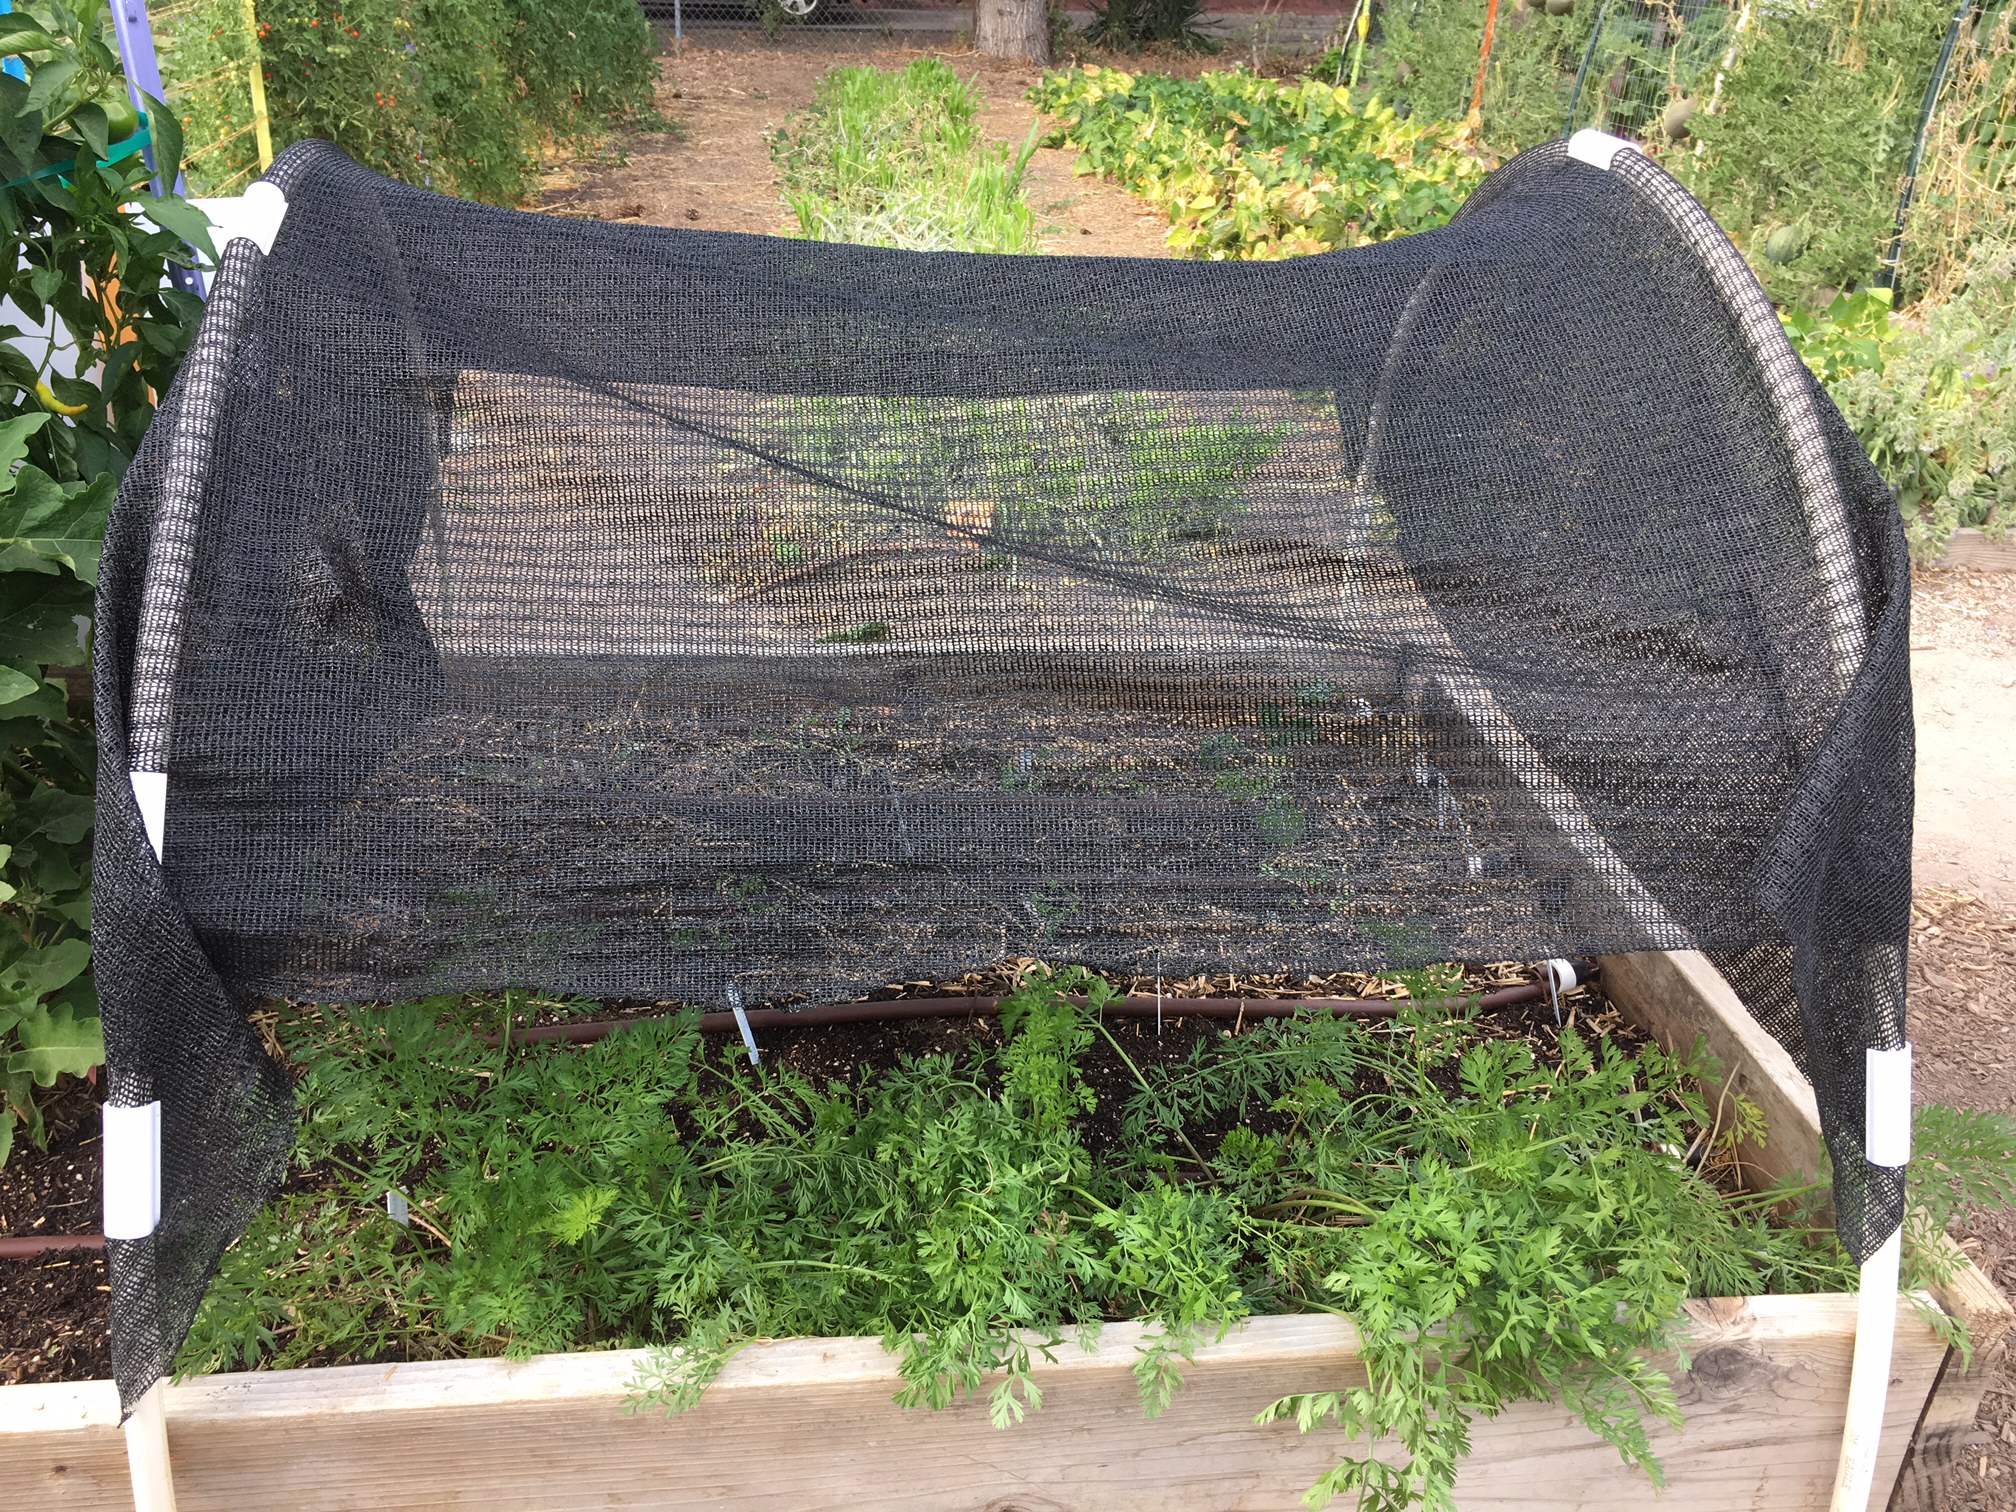 shade cloth over hoops demo bed July